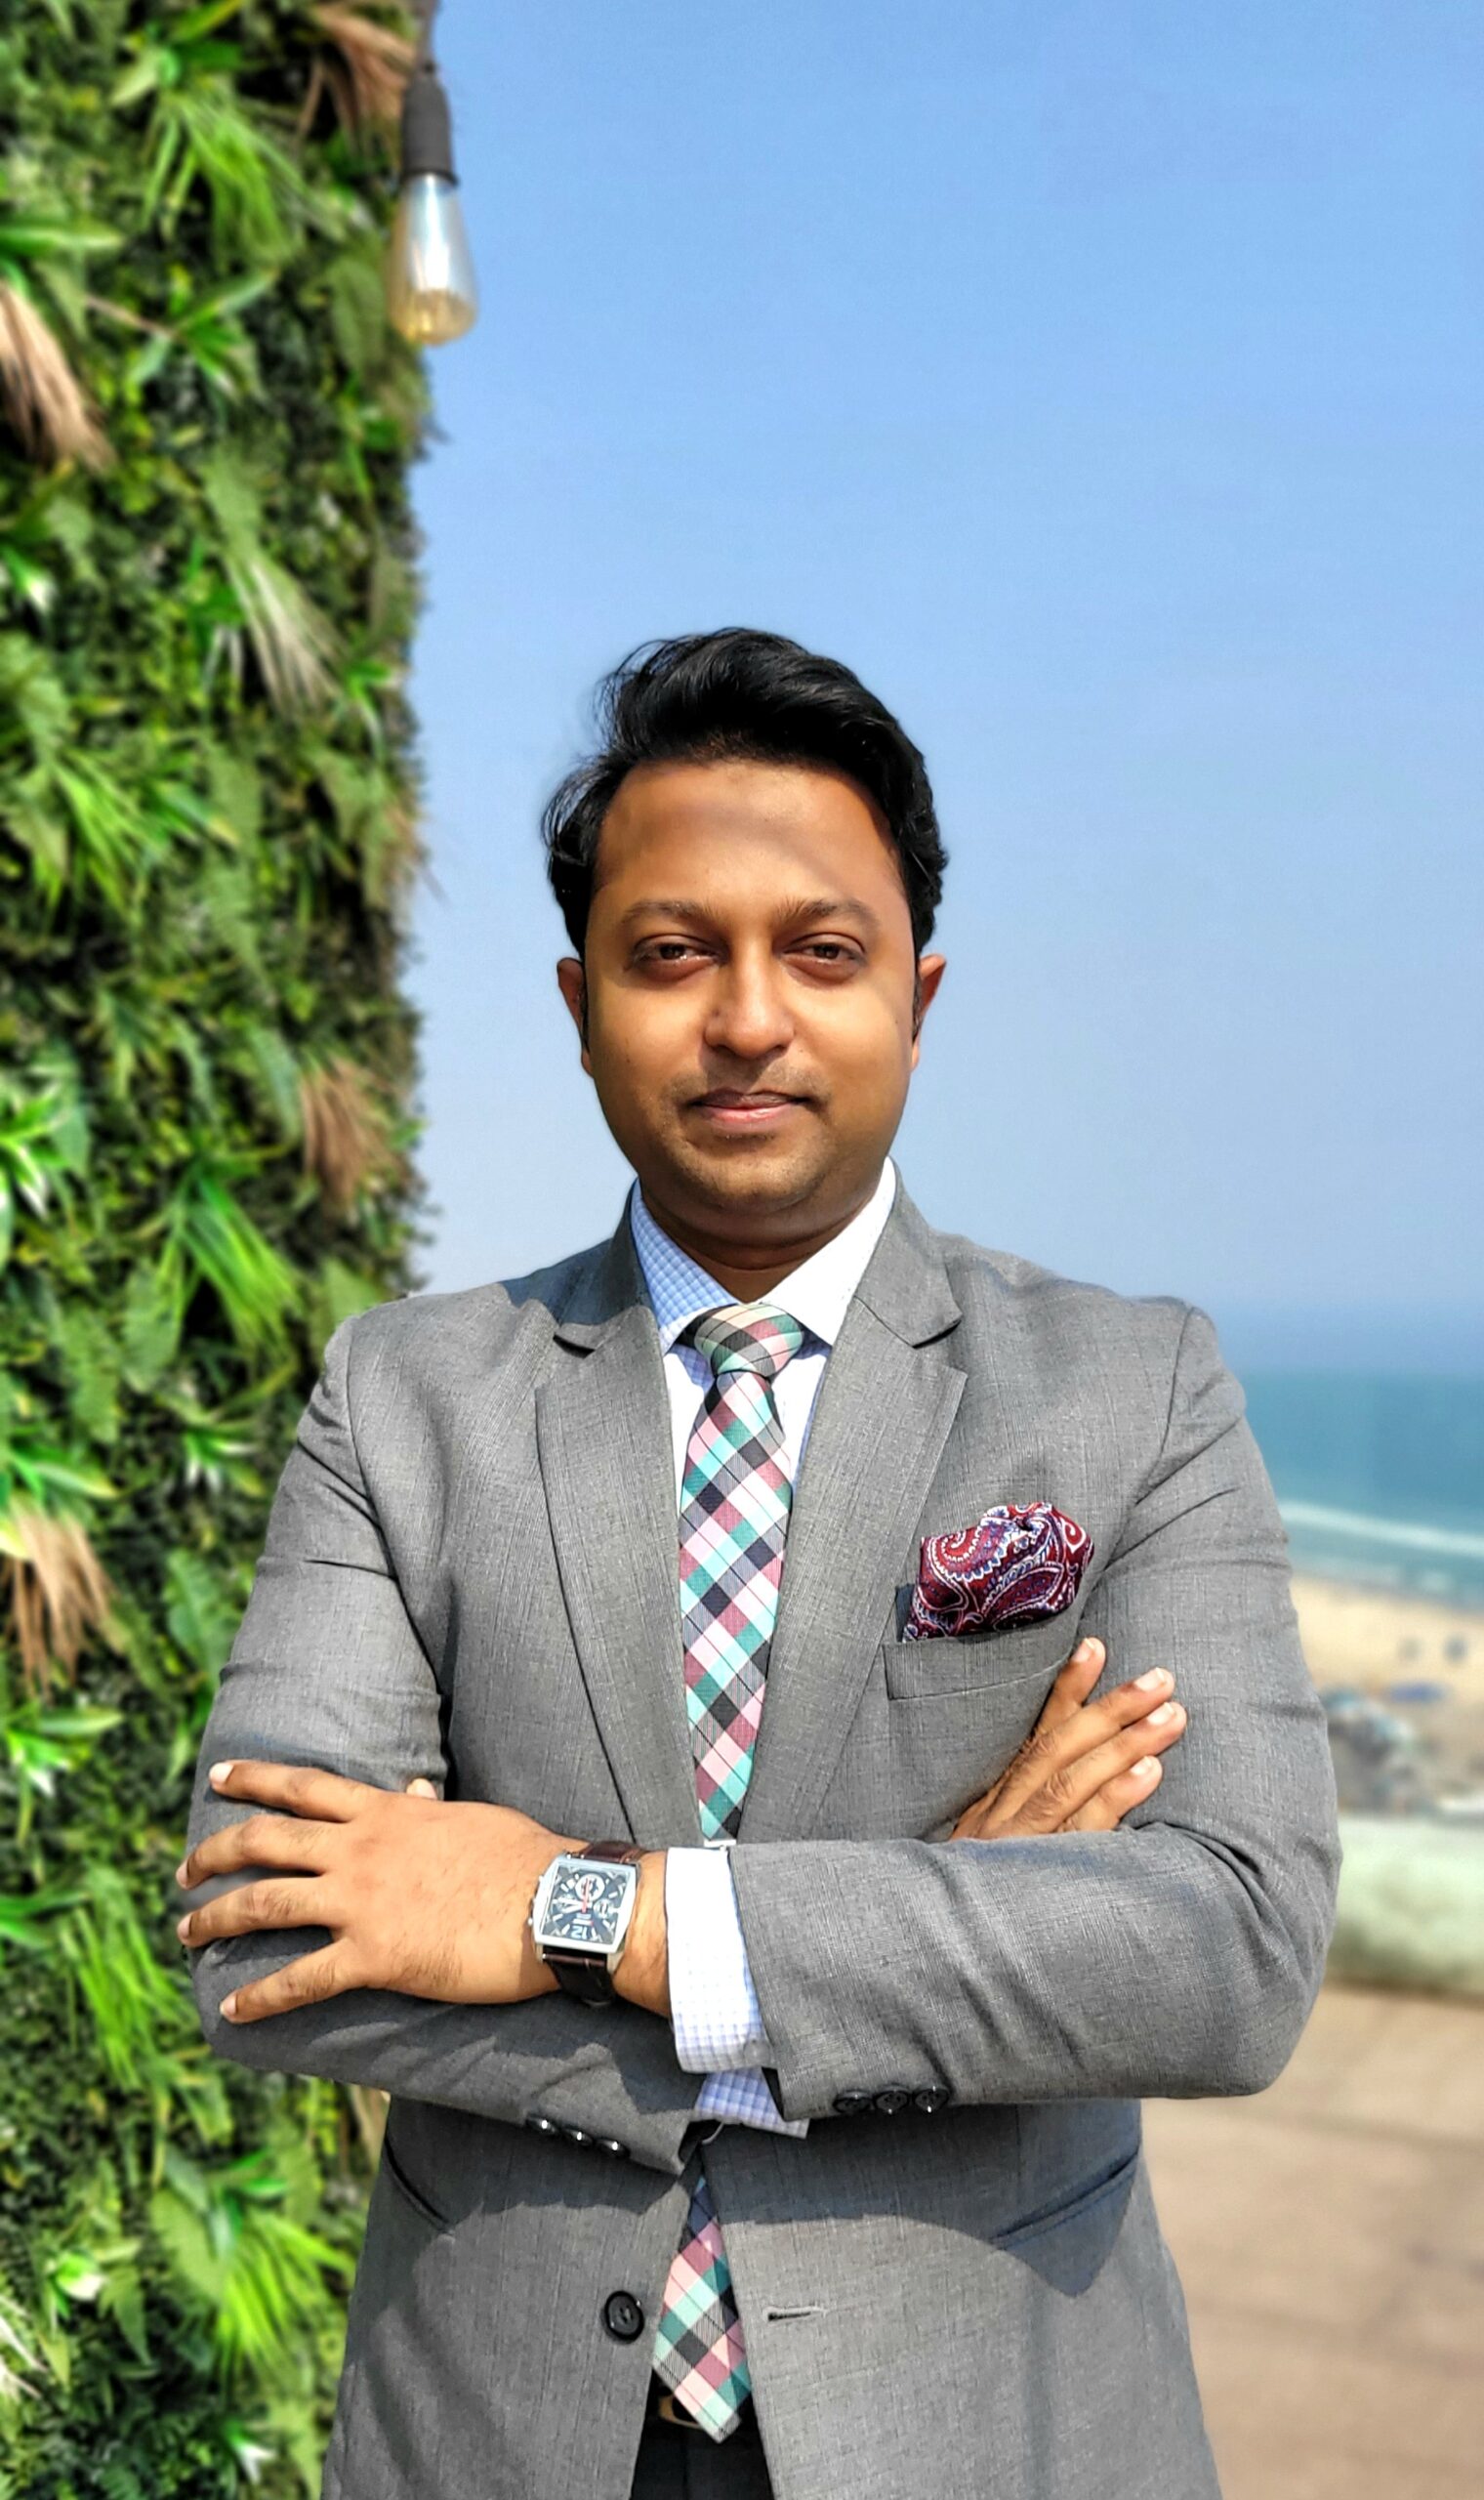 The Novotel Visakhapatnam Varun Beach Hotel appoints Mohammad Imran Khan as Cluster Revenue Manager